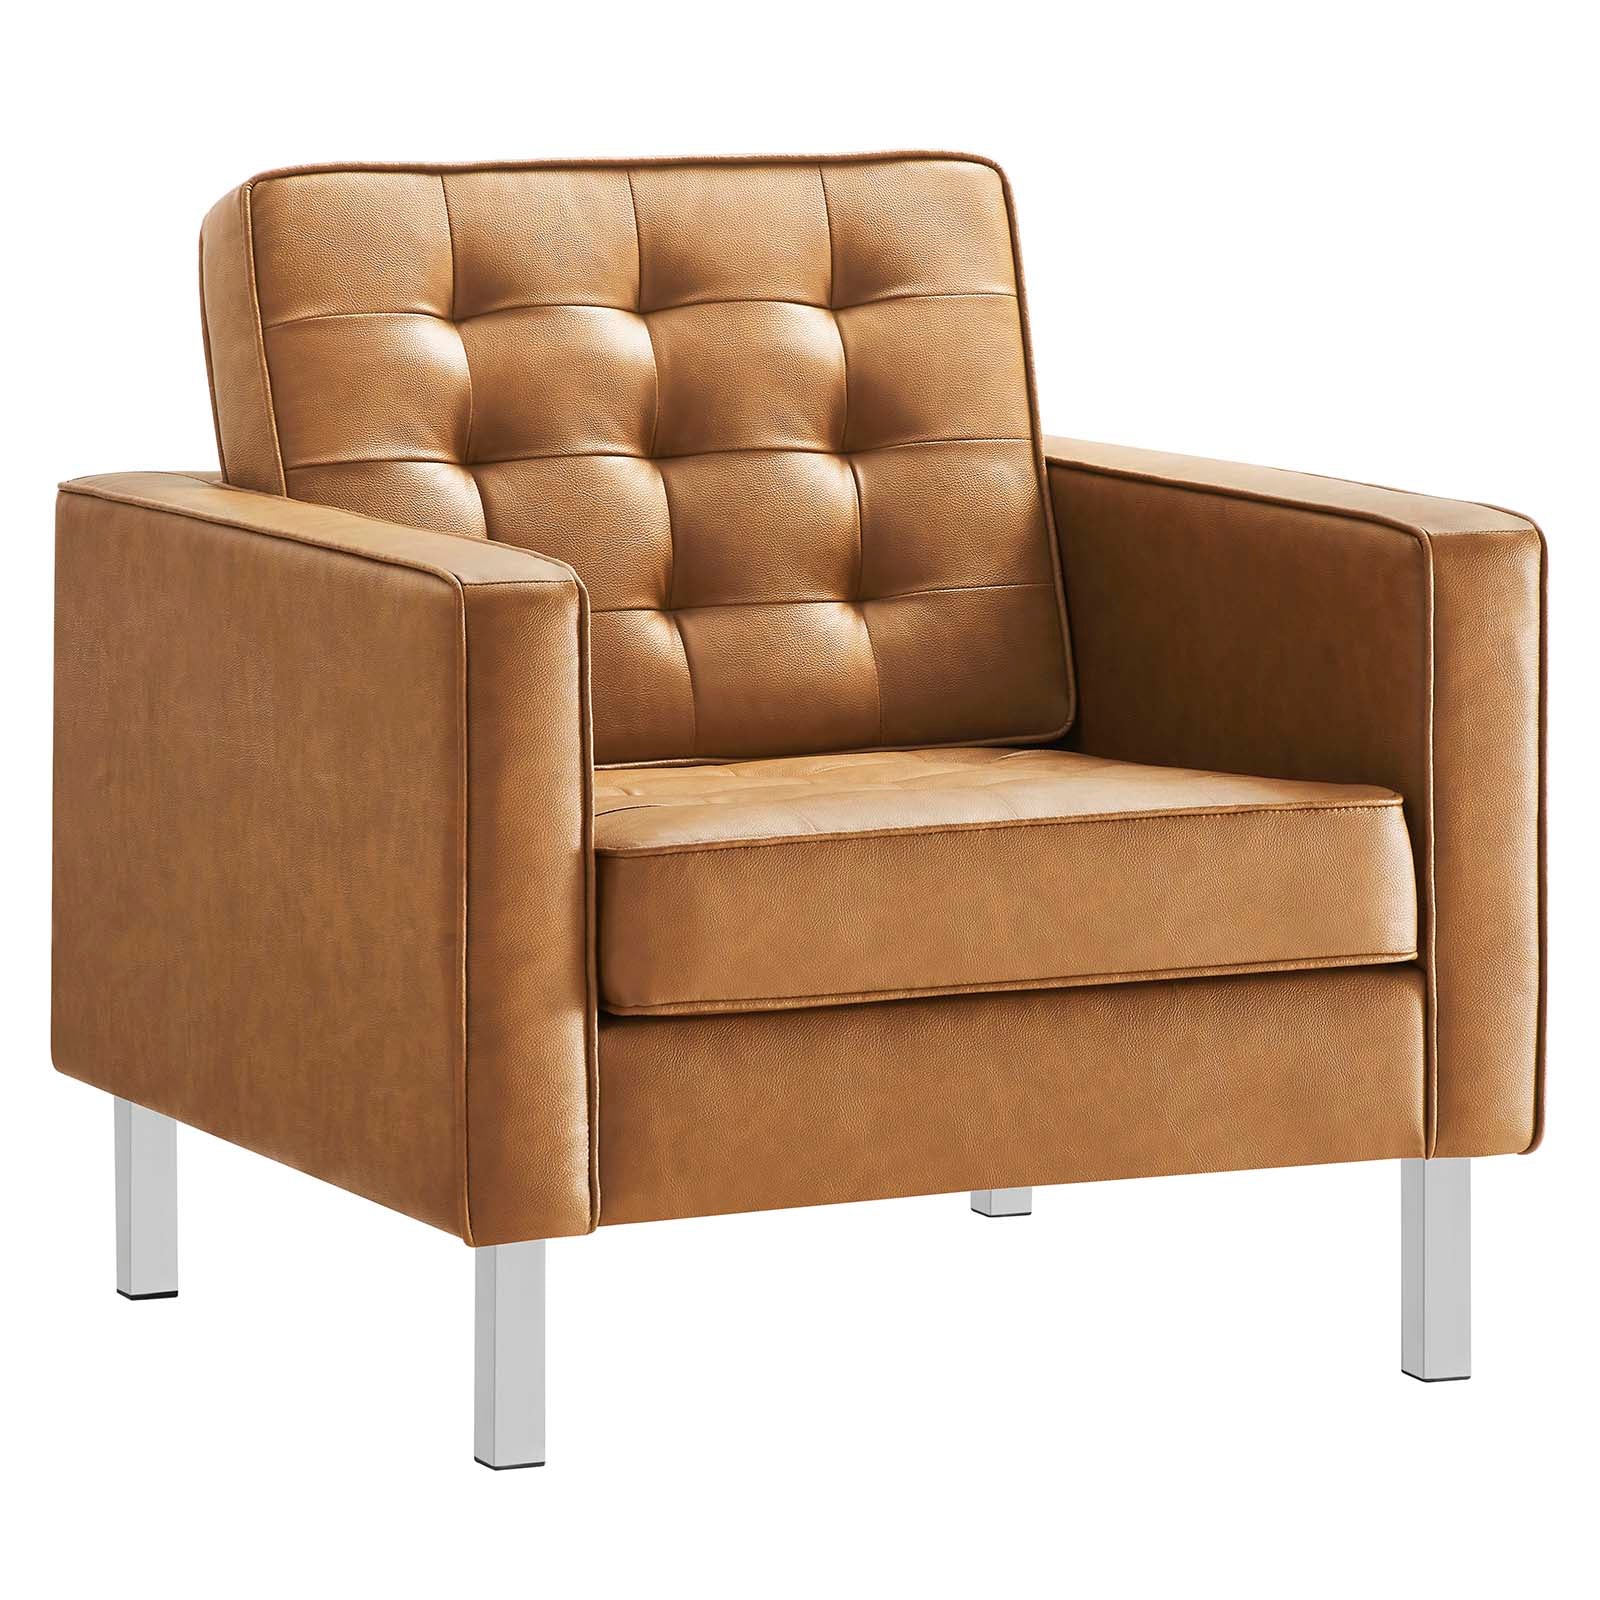 Modway Accent Chairs - Loft Tufted Upholstered Faux Leather Armchair Silver Tan